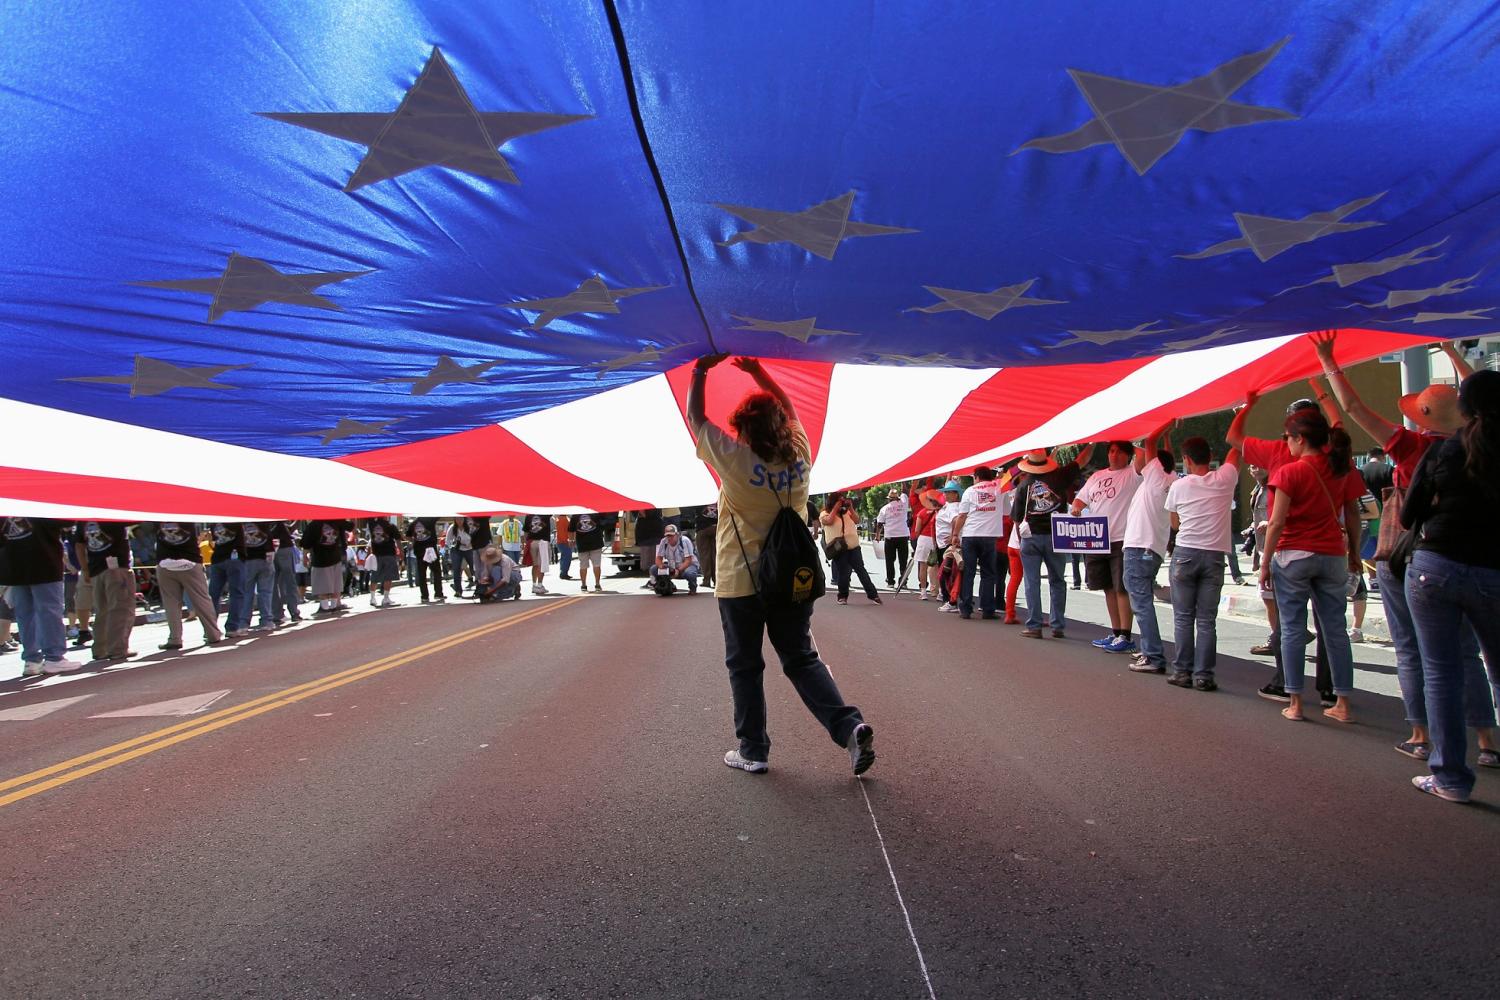 Participants carry a large U.S. flag during a march for immigration reform in Hollywood, Los Angeles, California, October 5, 2013. REUTERS/David McNew (UNITED STATES - Tags: CIVIL UNREST SOCIETY IMMIGRATION POLITICS)